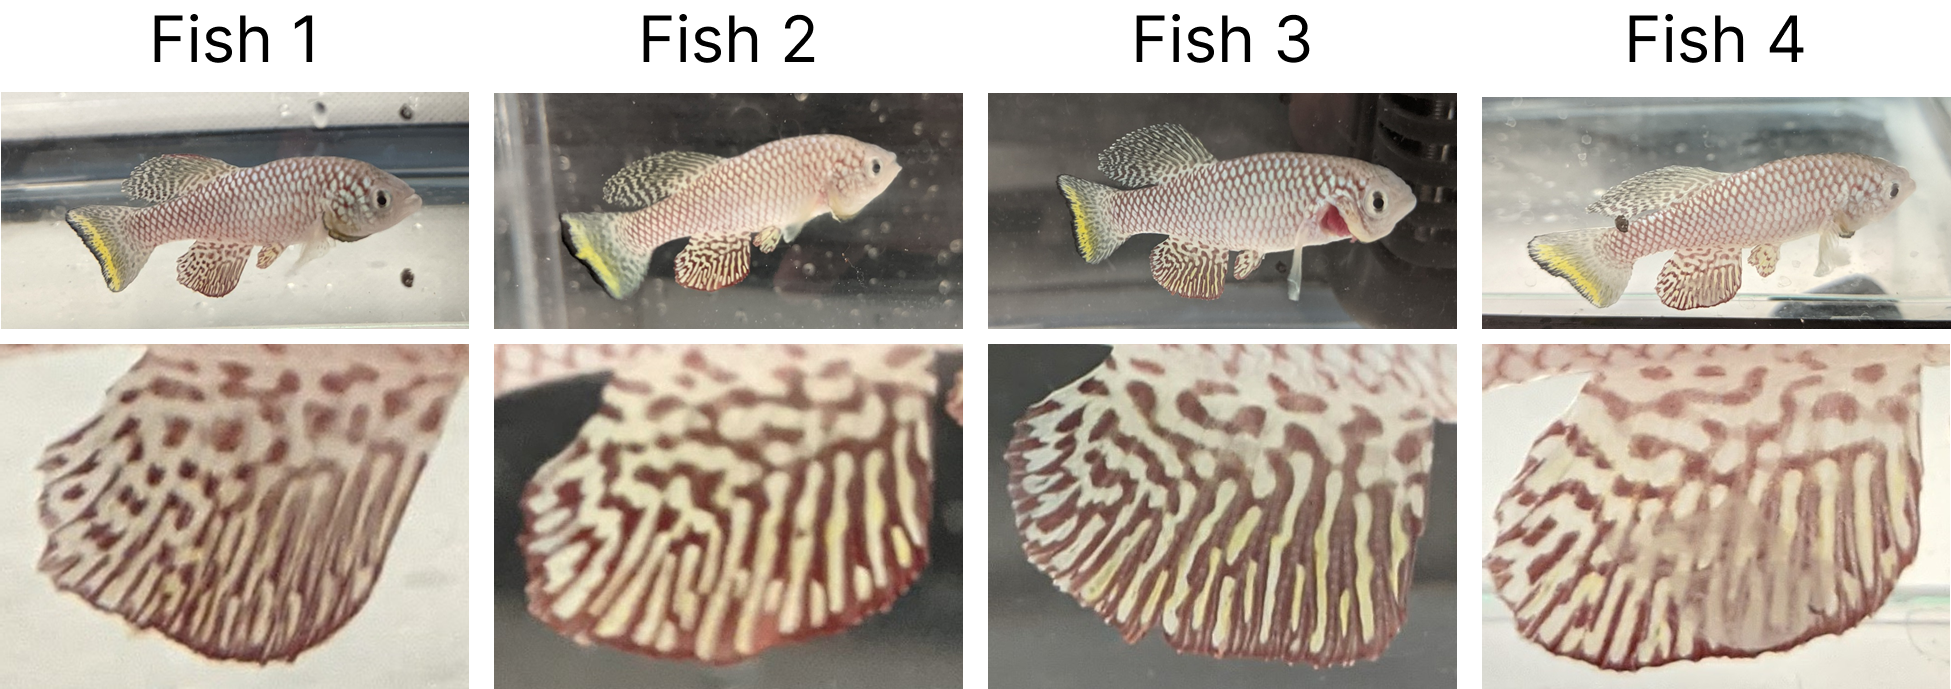 The patterns on killifish fins are similar but different between individuals